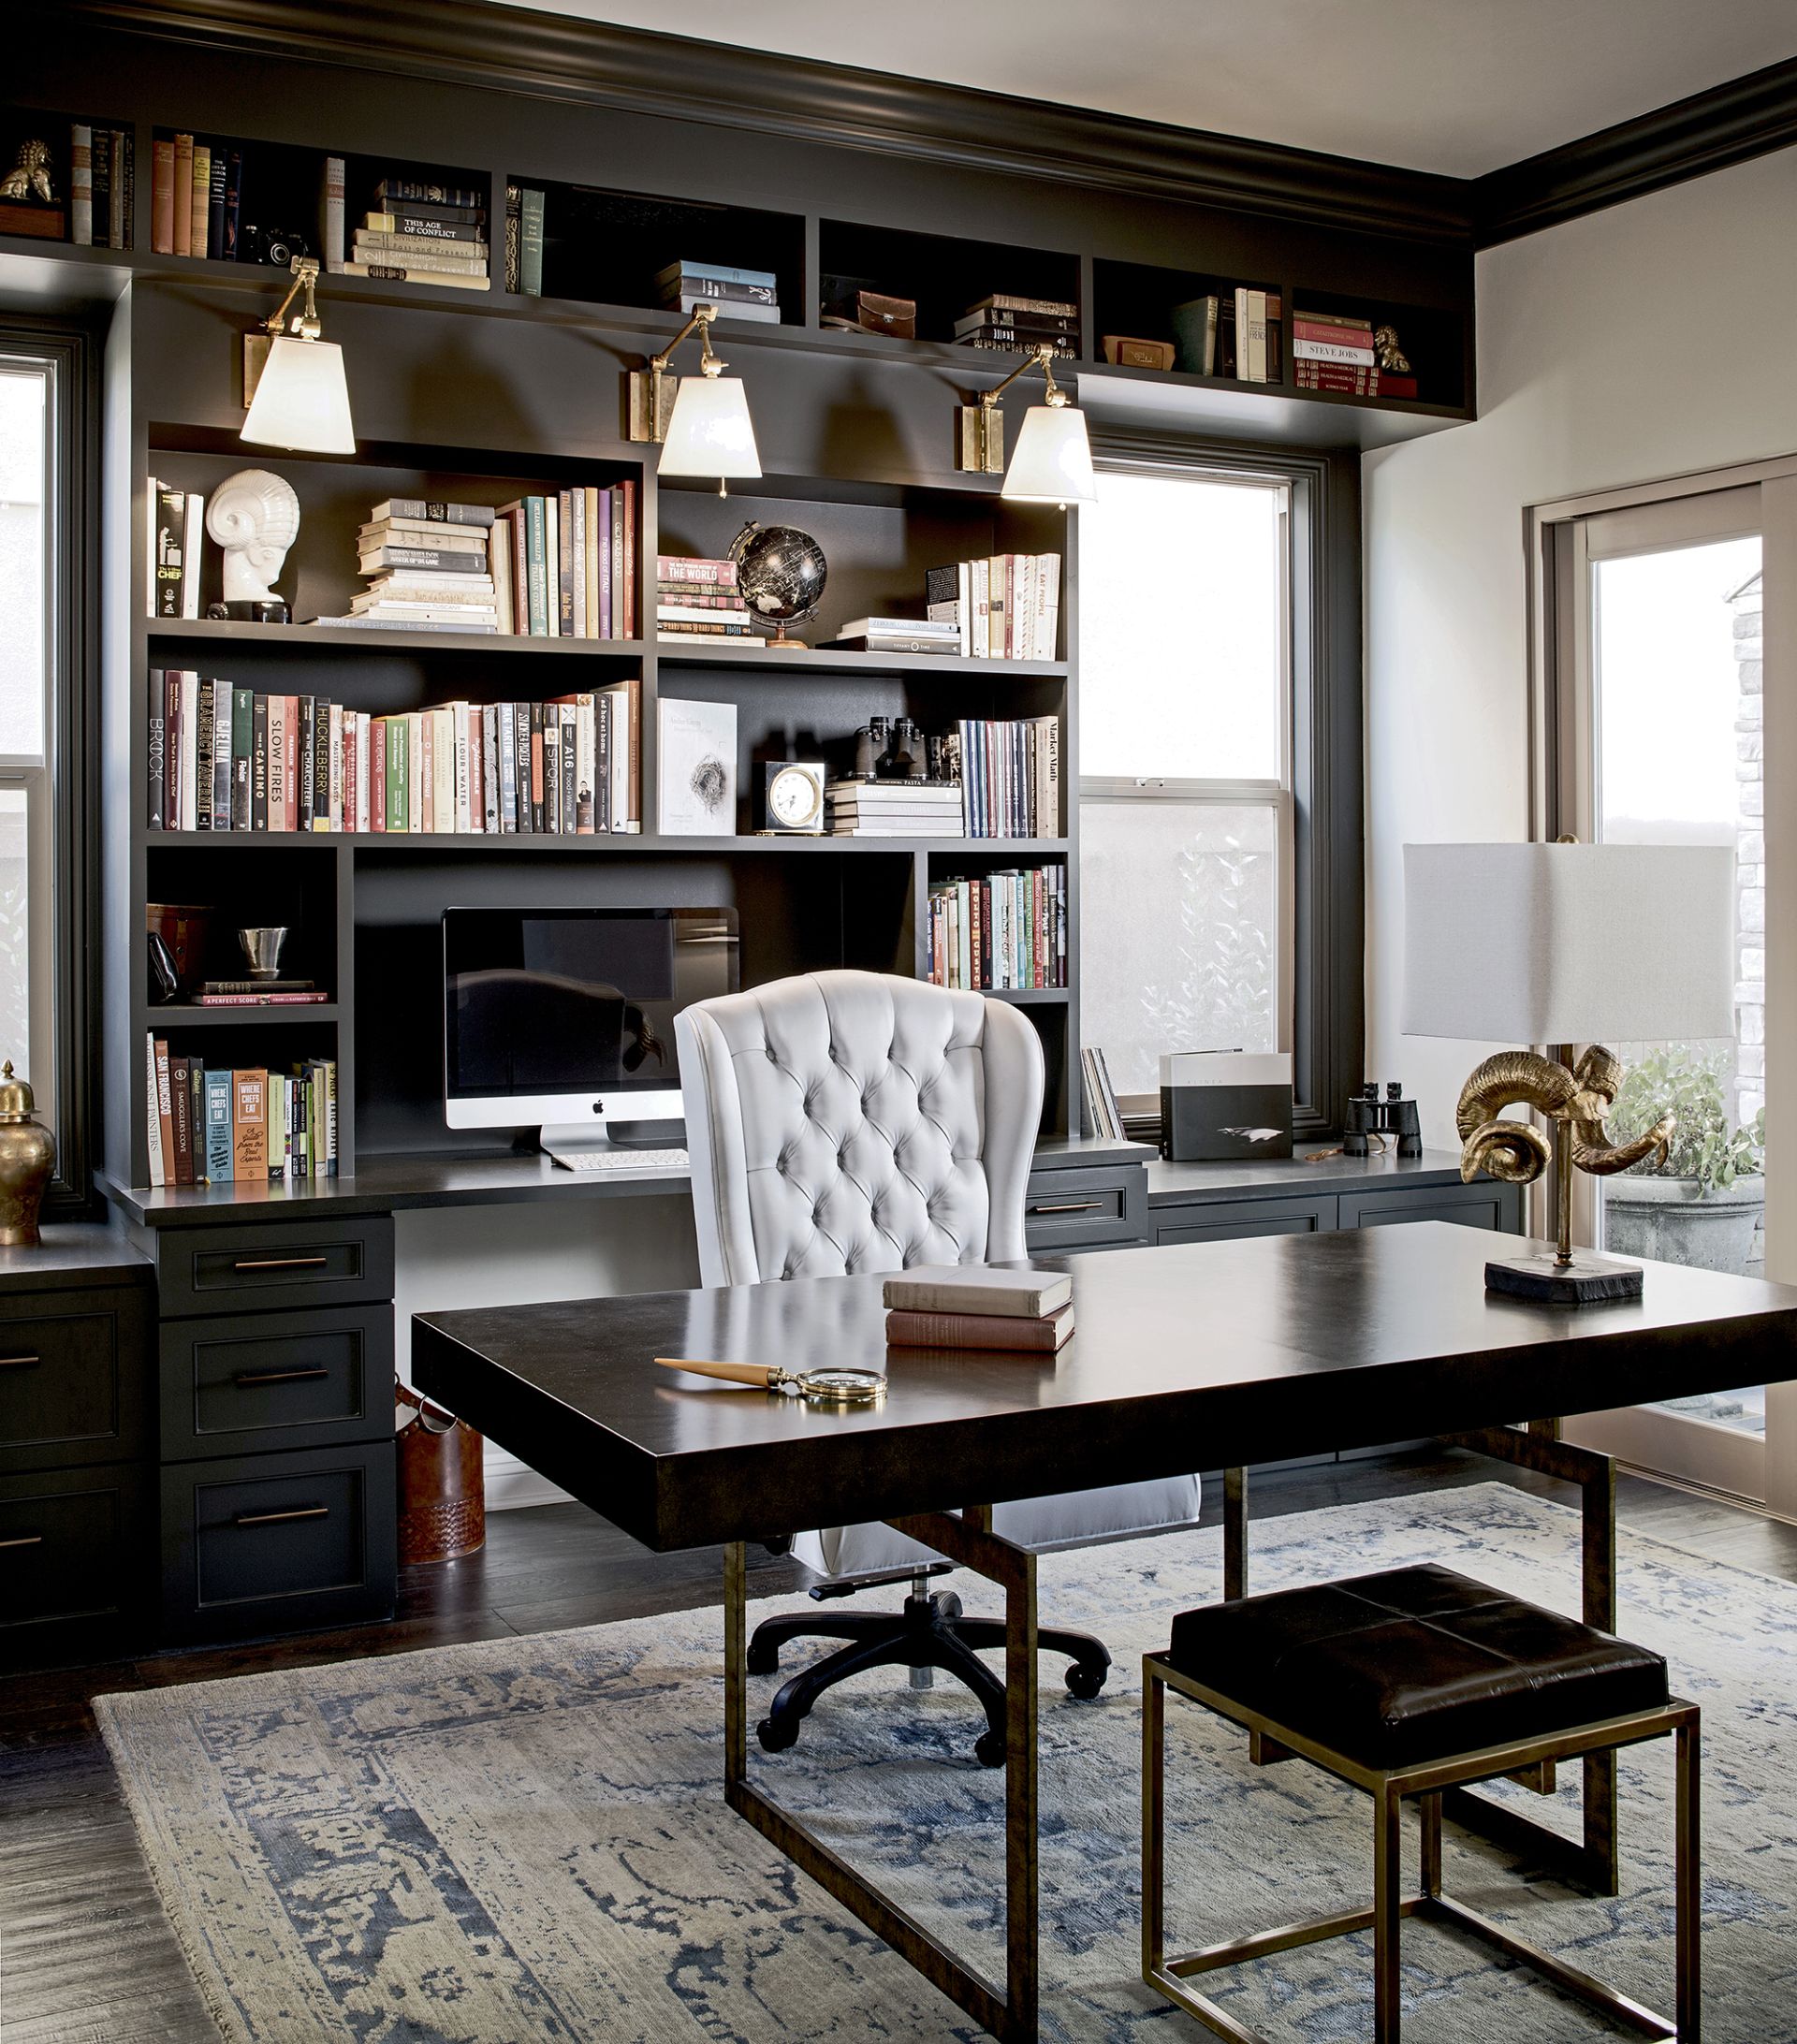 Home office ideas – 55 rooms that are smart, practical and stylish